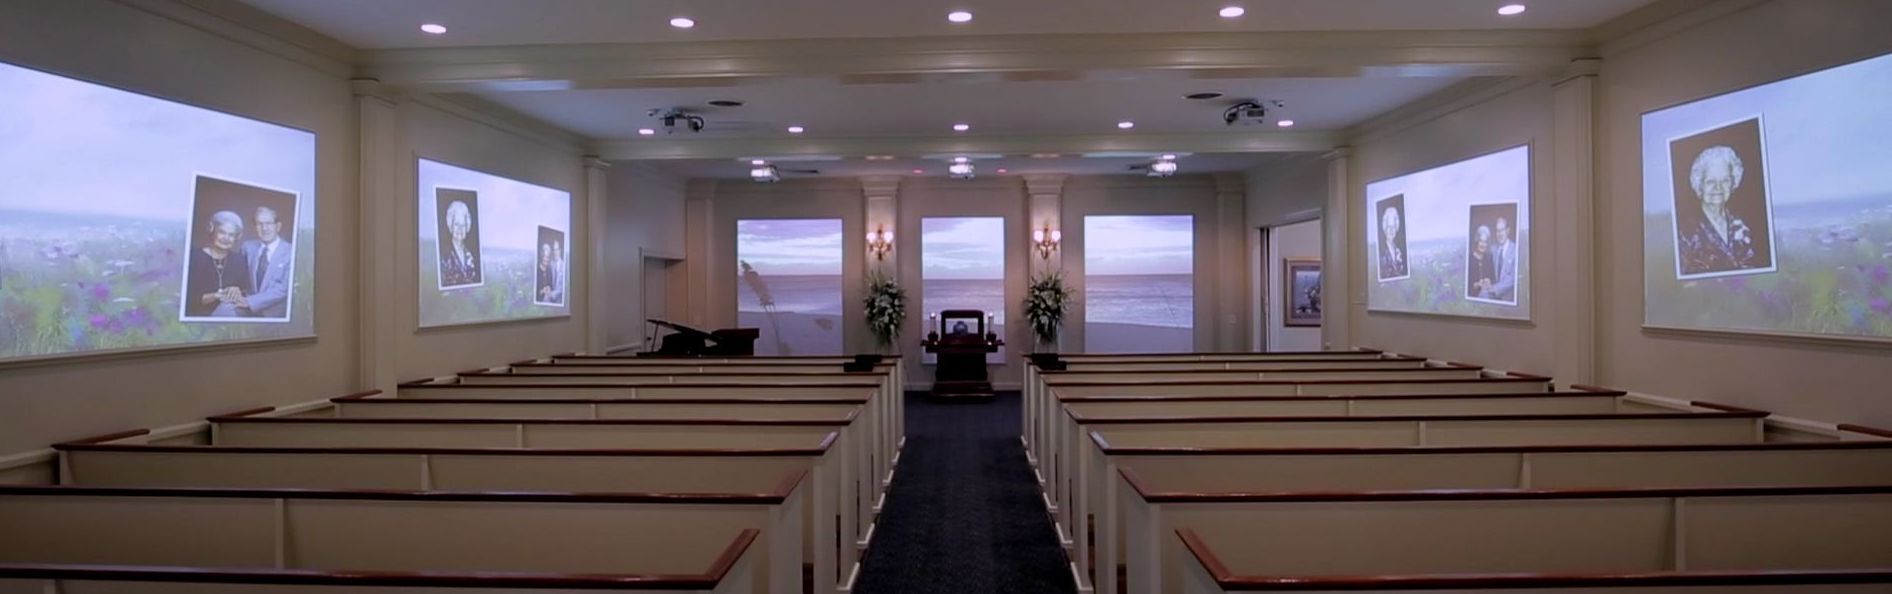 A church with rows of benches and a large screen on the wall.